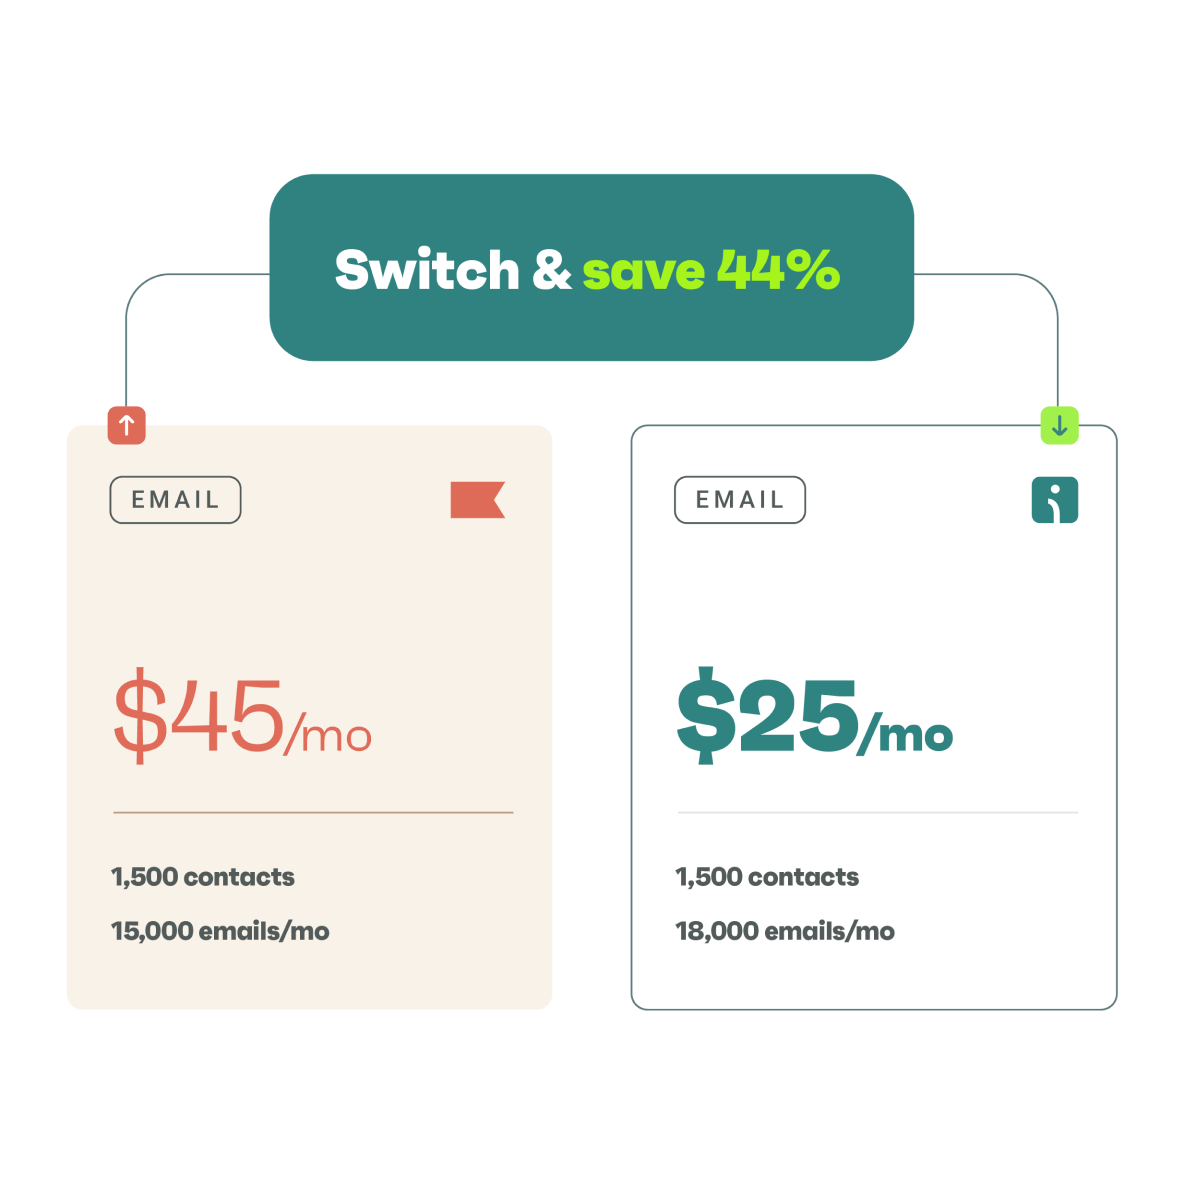 Get better pricing with more emails